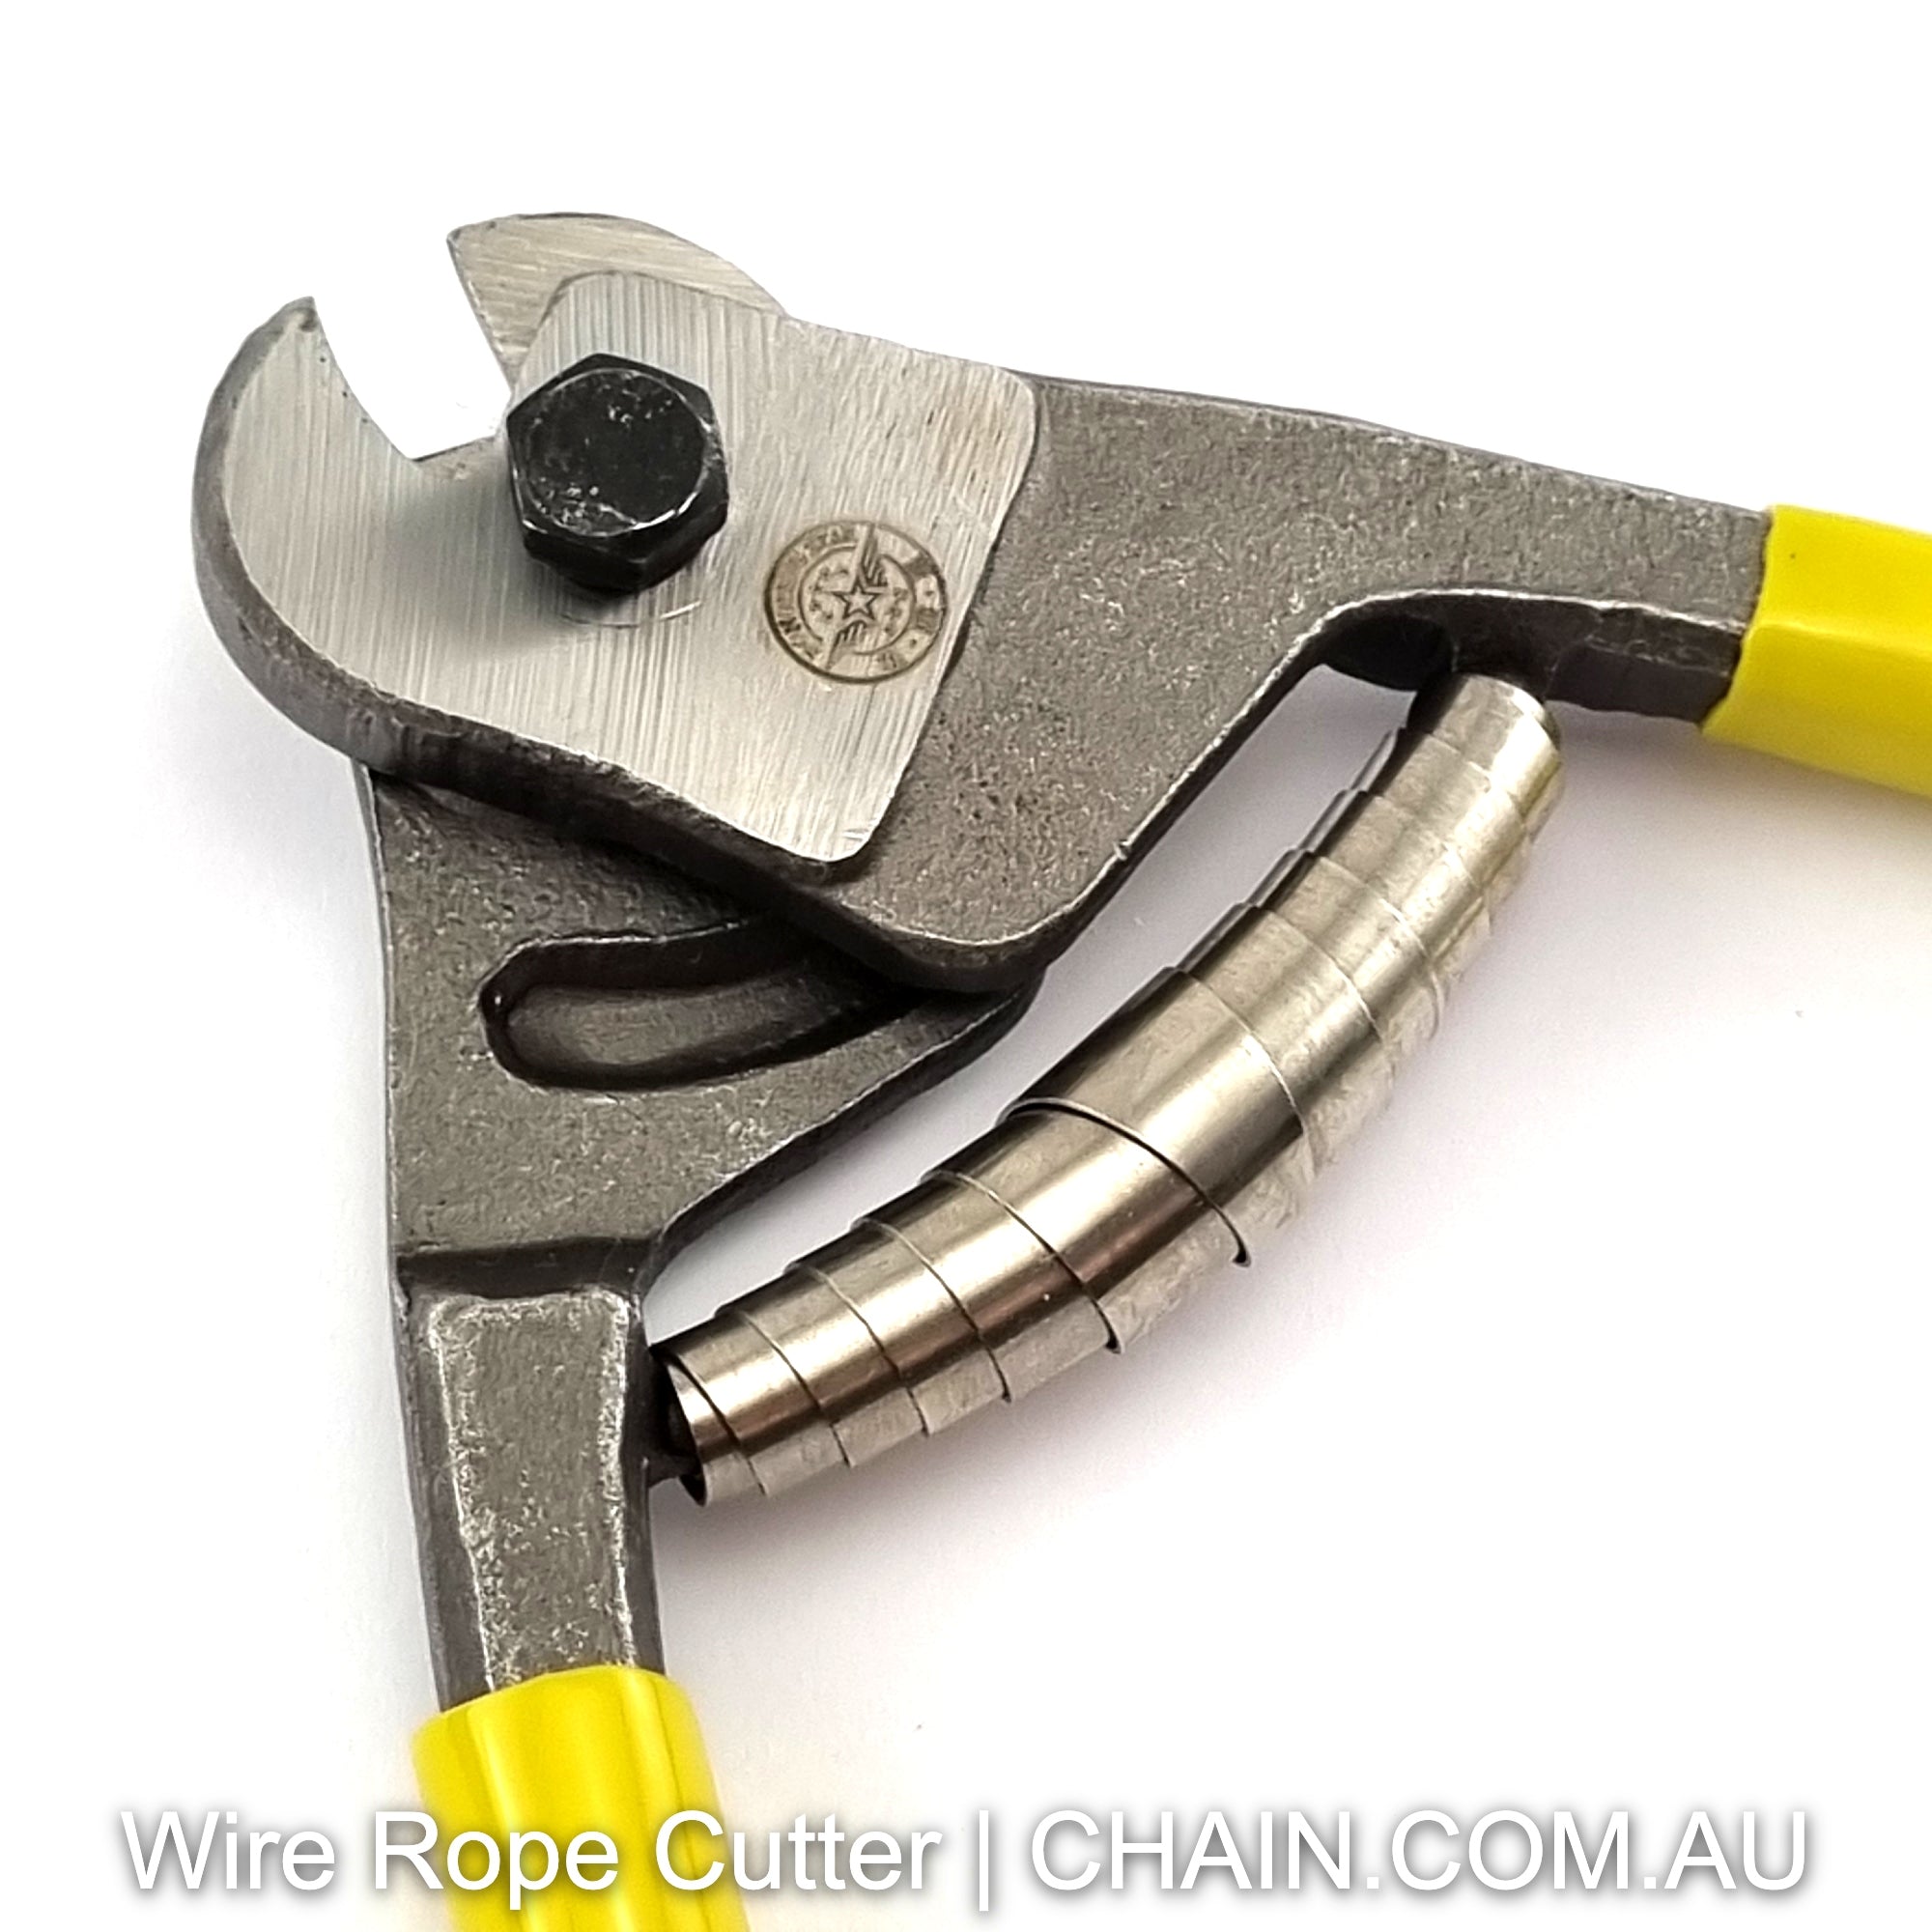 Wire Rope Cutter (also known as Wire Cable Cutter or Cable Cutter). Shop tools and hardware online. Australia wide shipping. Chain.com.au